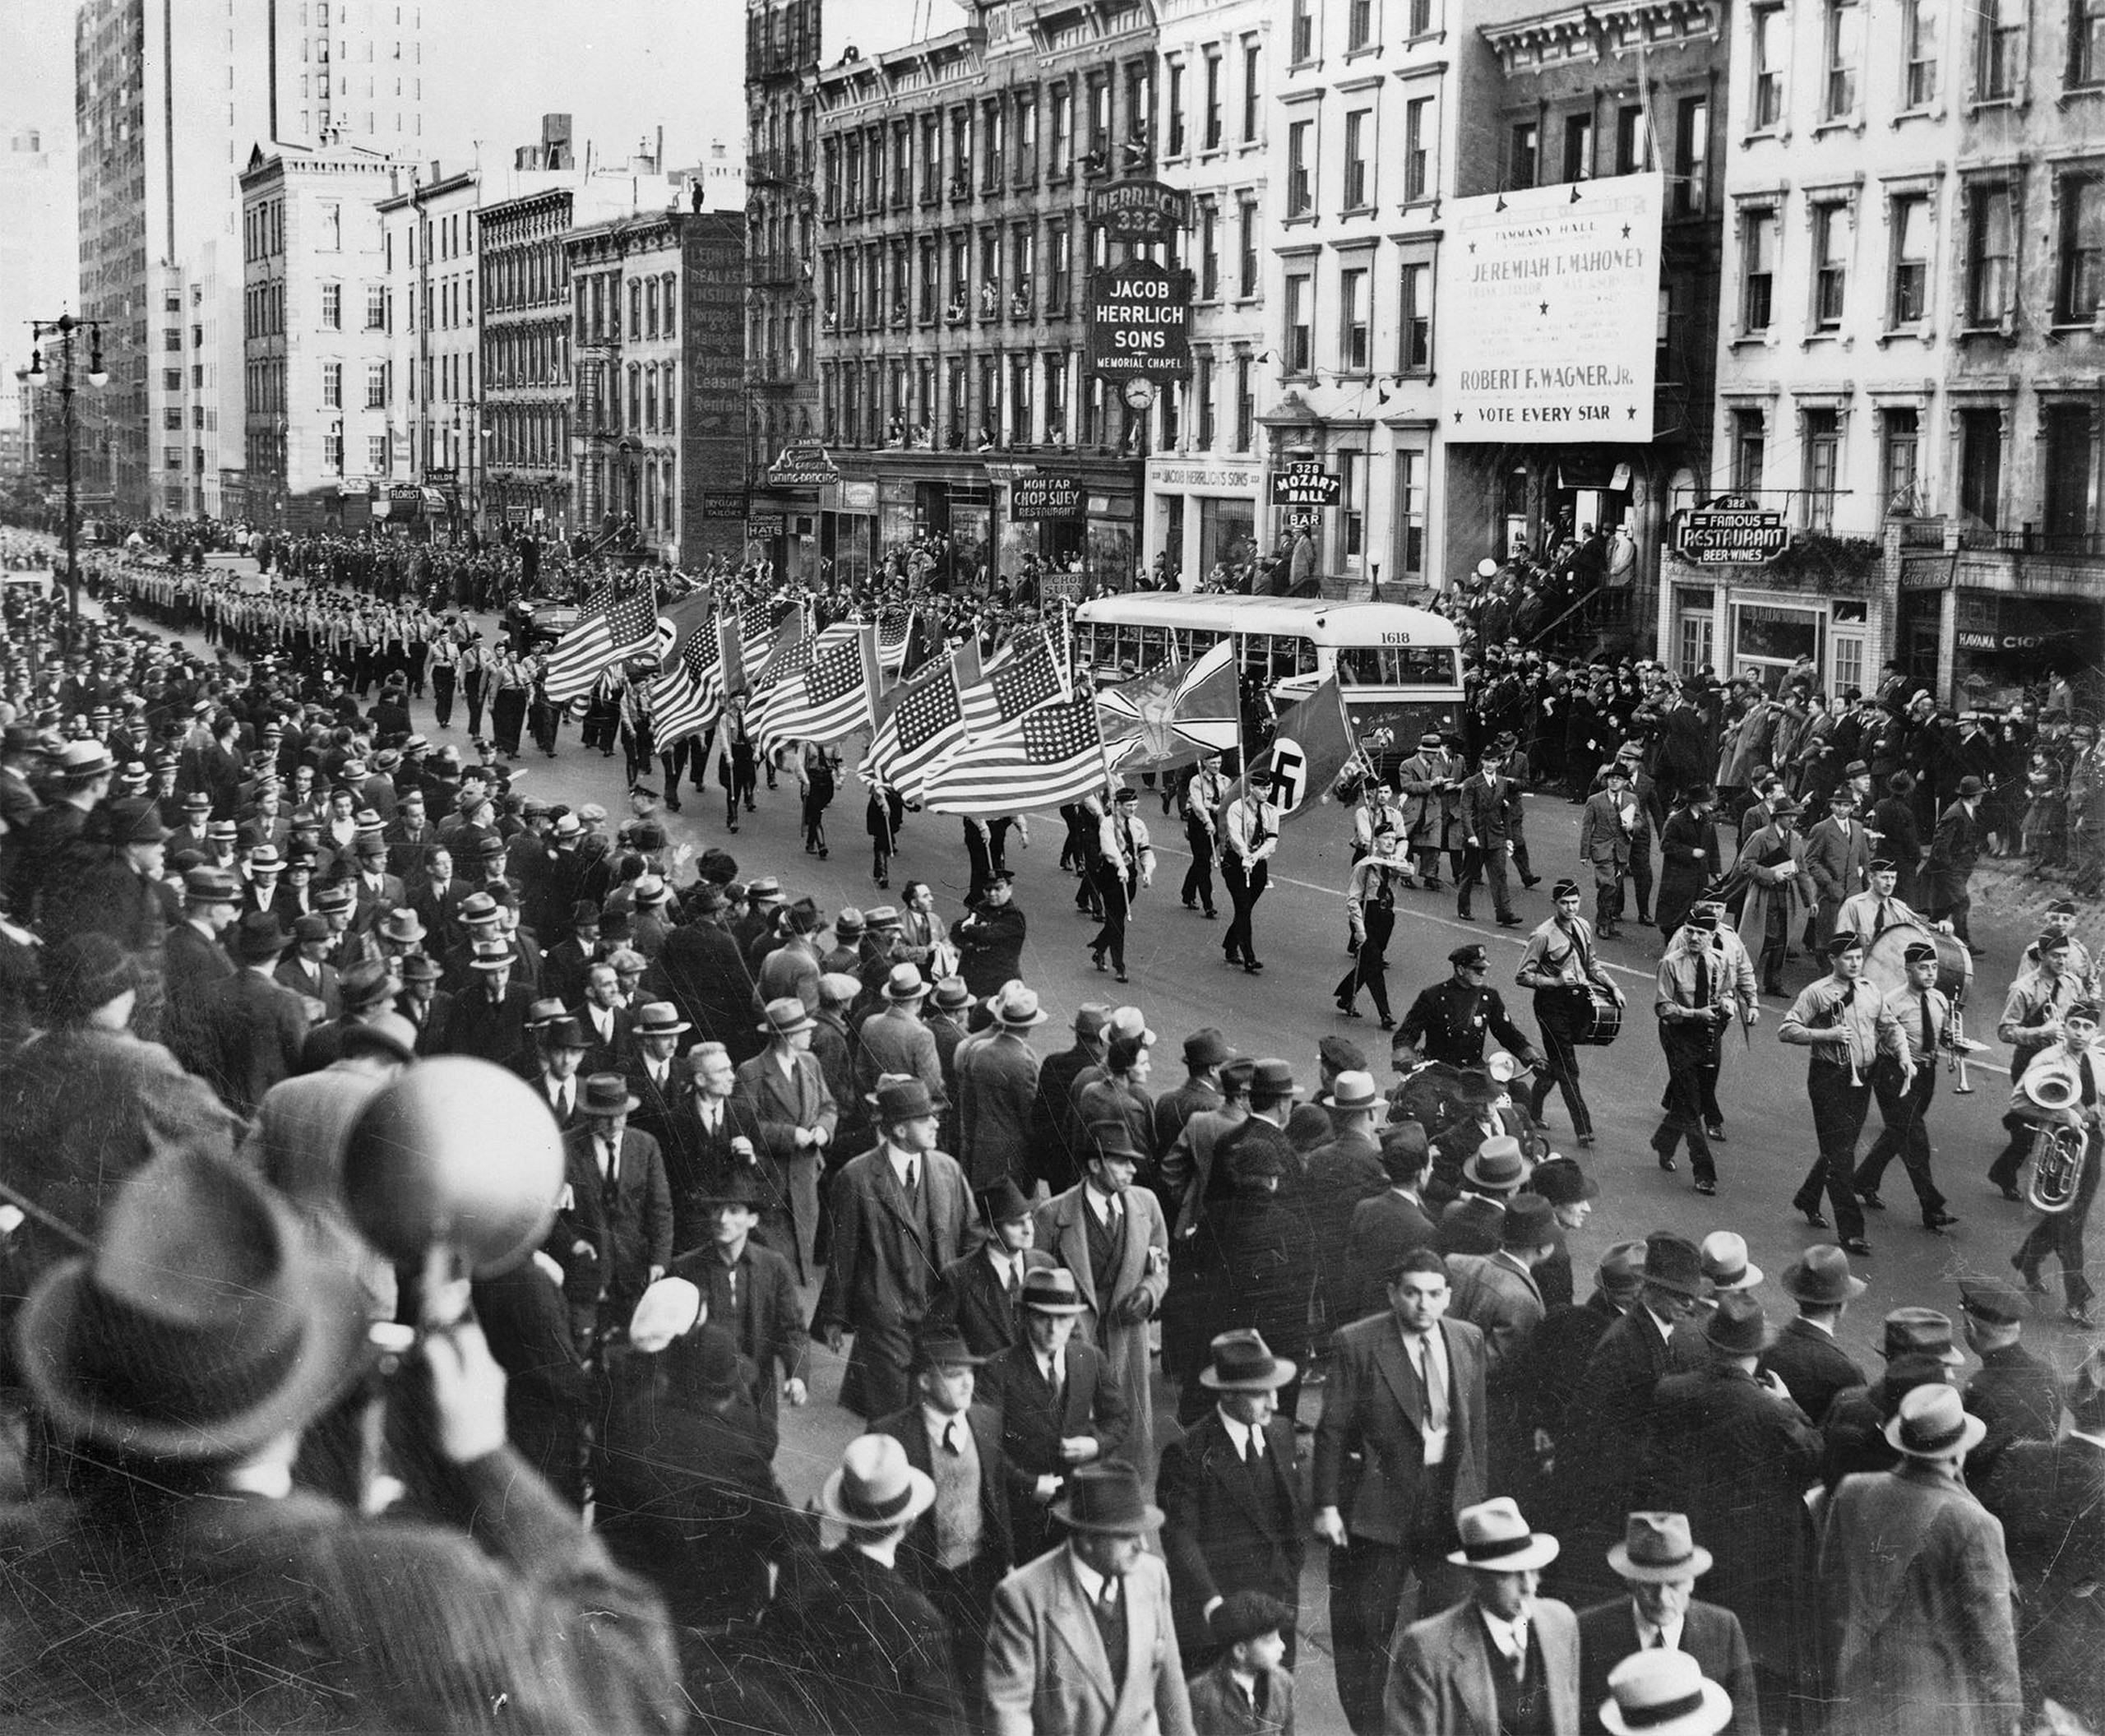 American Nazis parade on East 86th St. in New York City around 1939. (Universal History Archive/UIG/Getty Images)